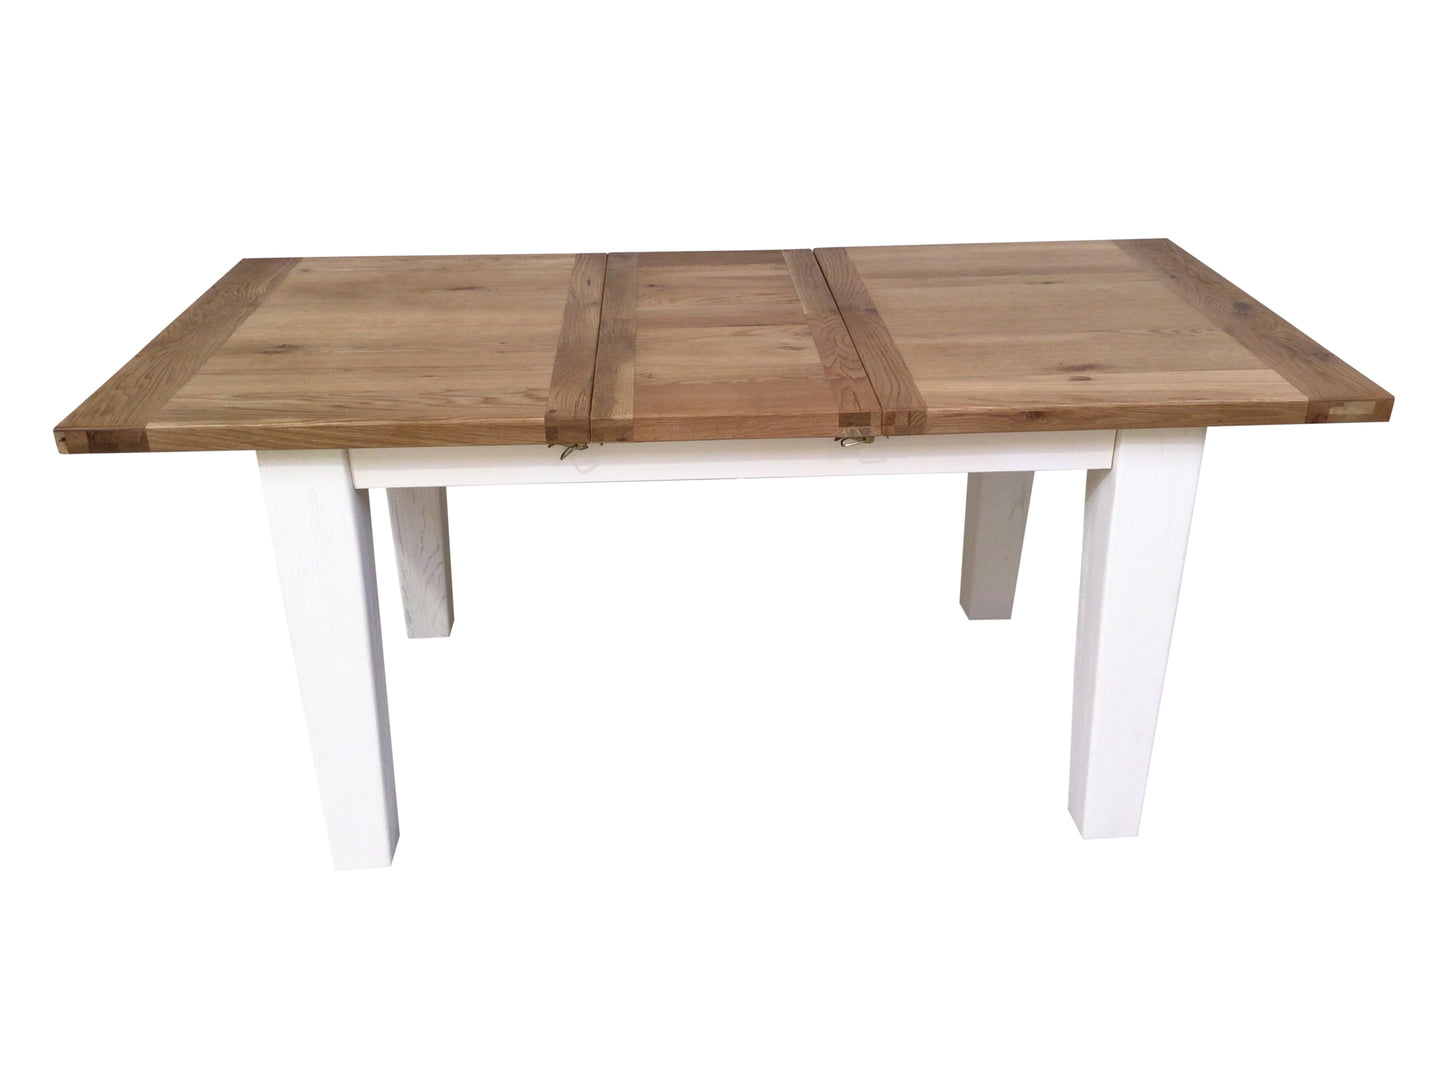 Calgary Oak 1.8m Ext Dining Table - Painted Off-White